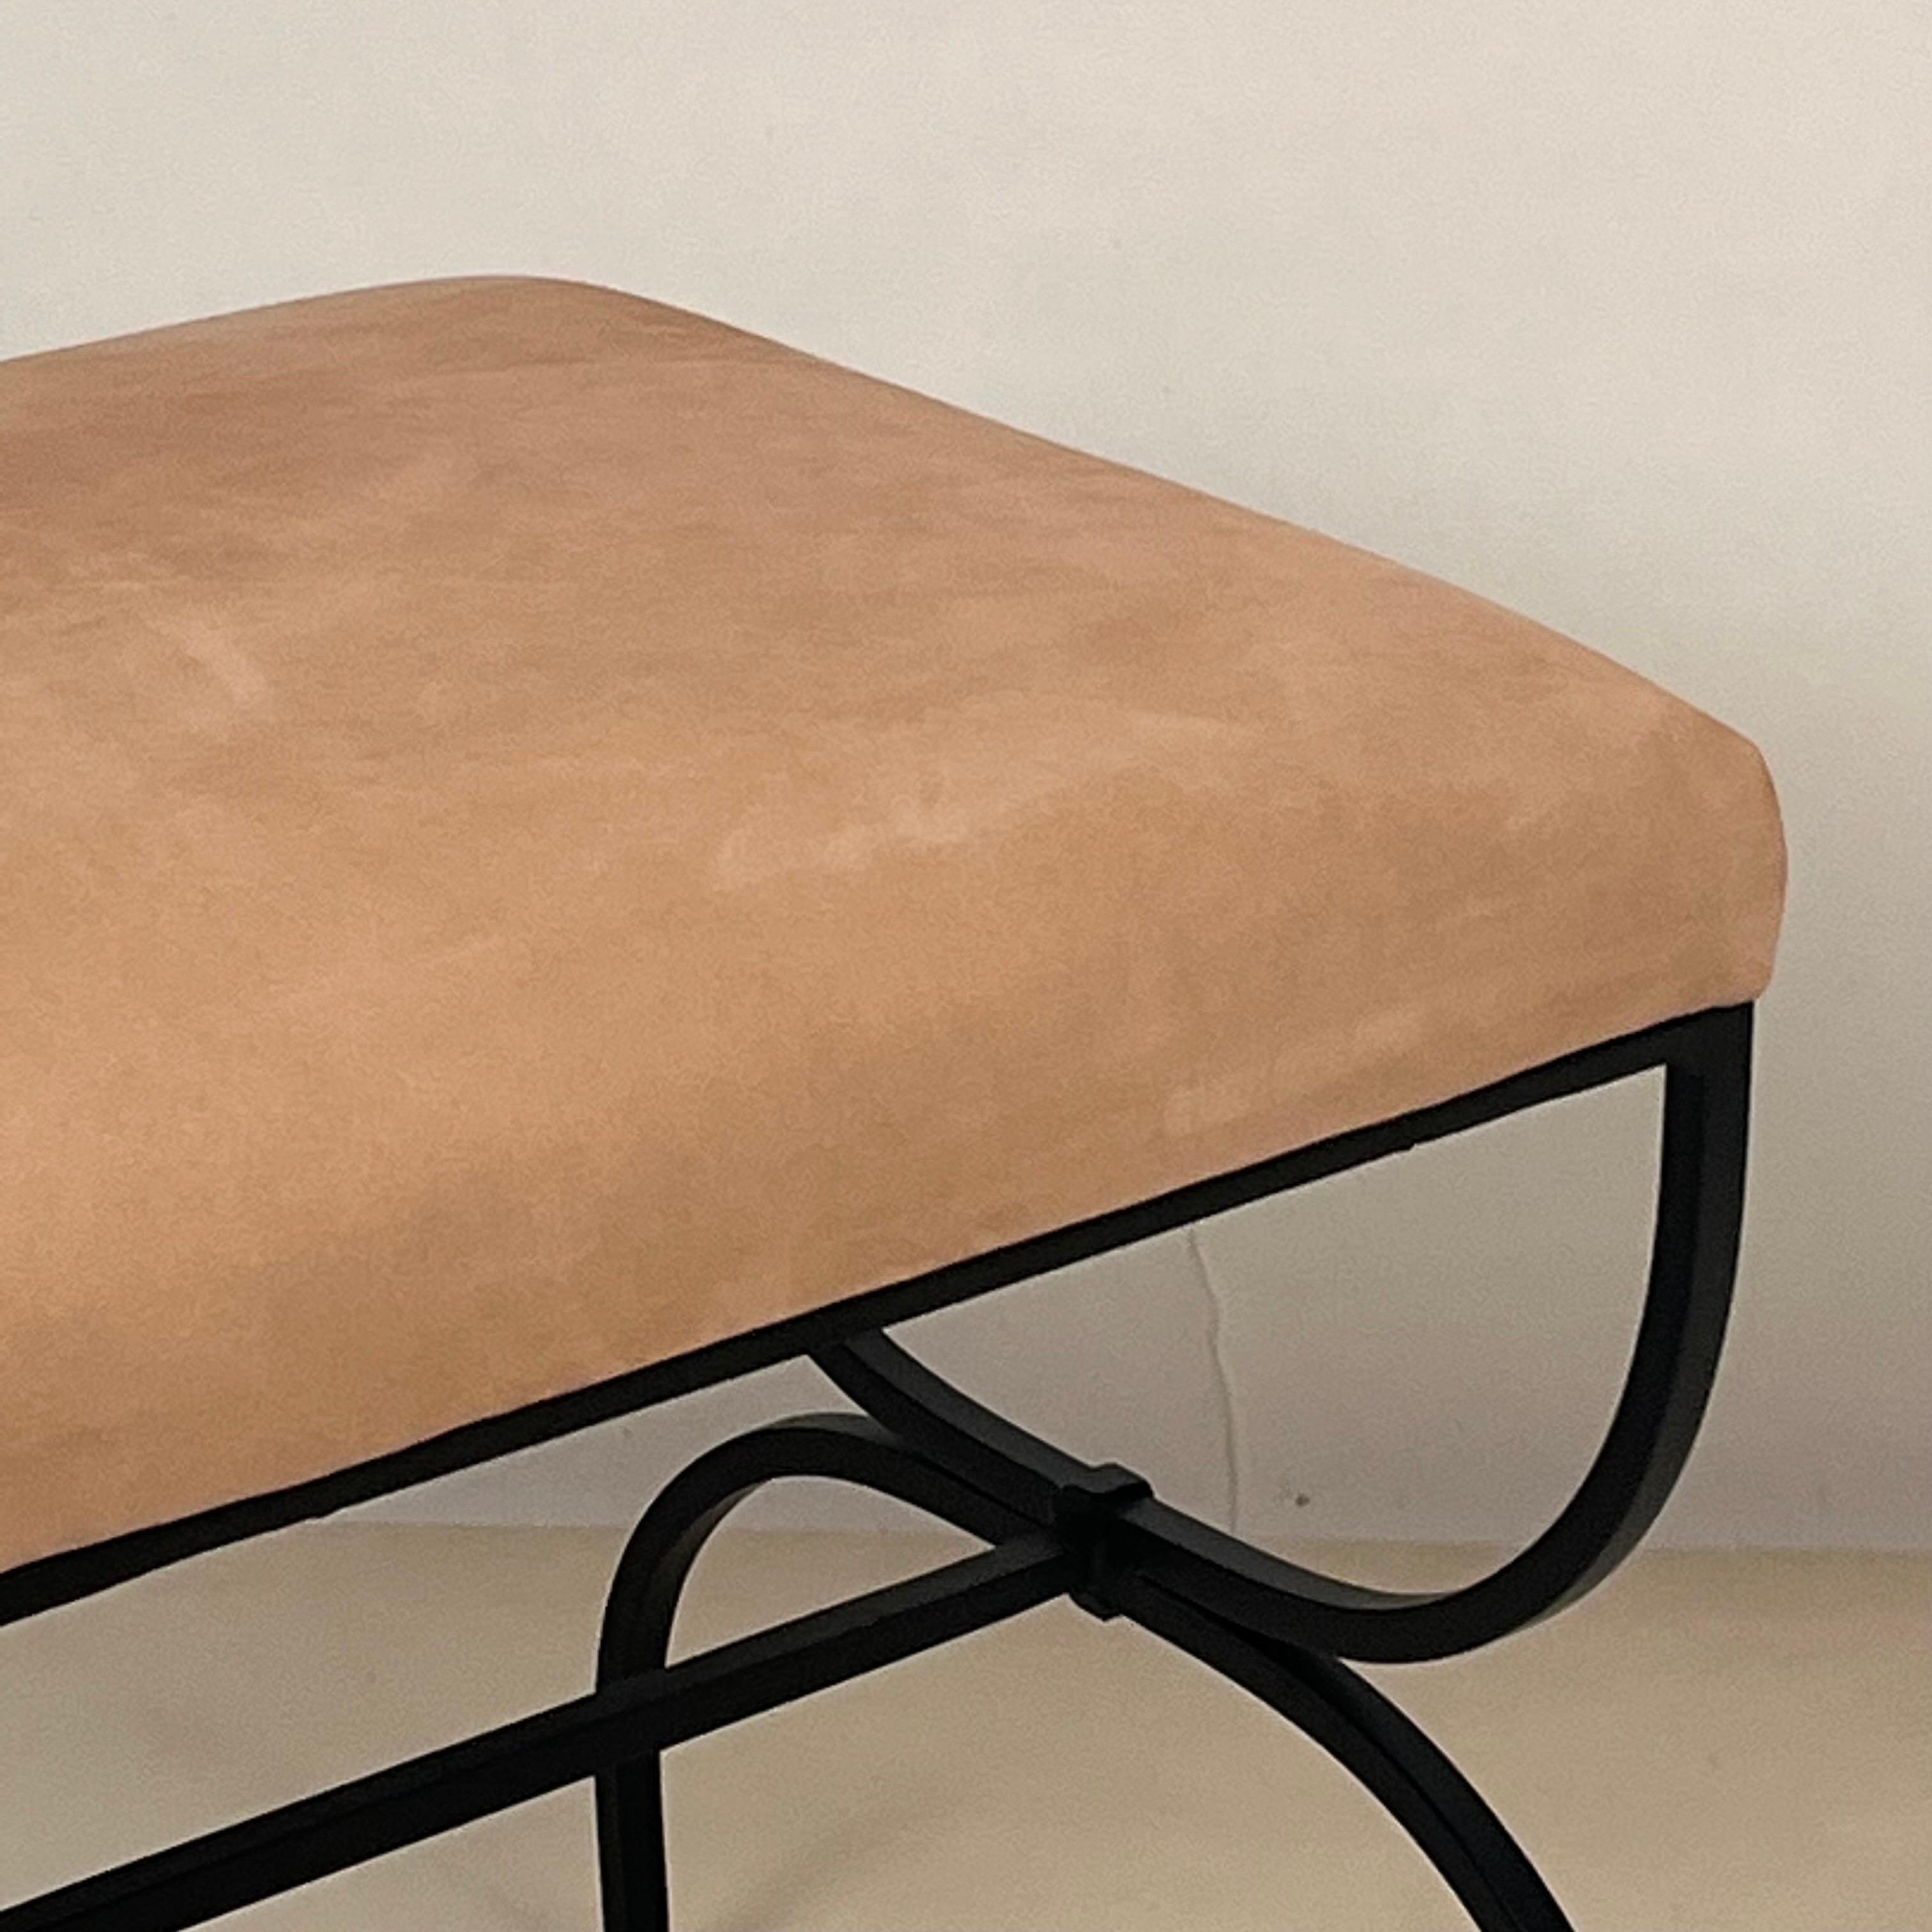 Contemporary Pair of 'Strapontin' Stools in Cognac Nubuck Leather by Design Frères For Sale